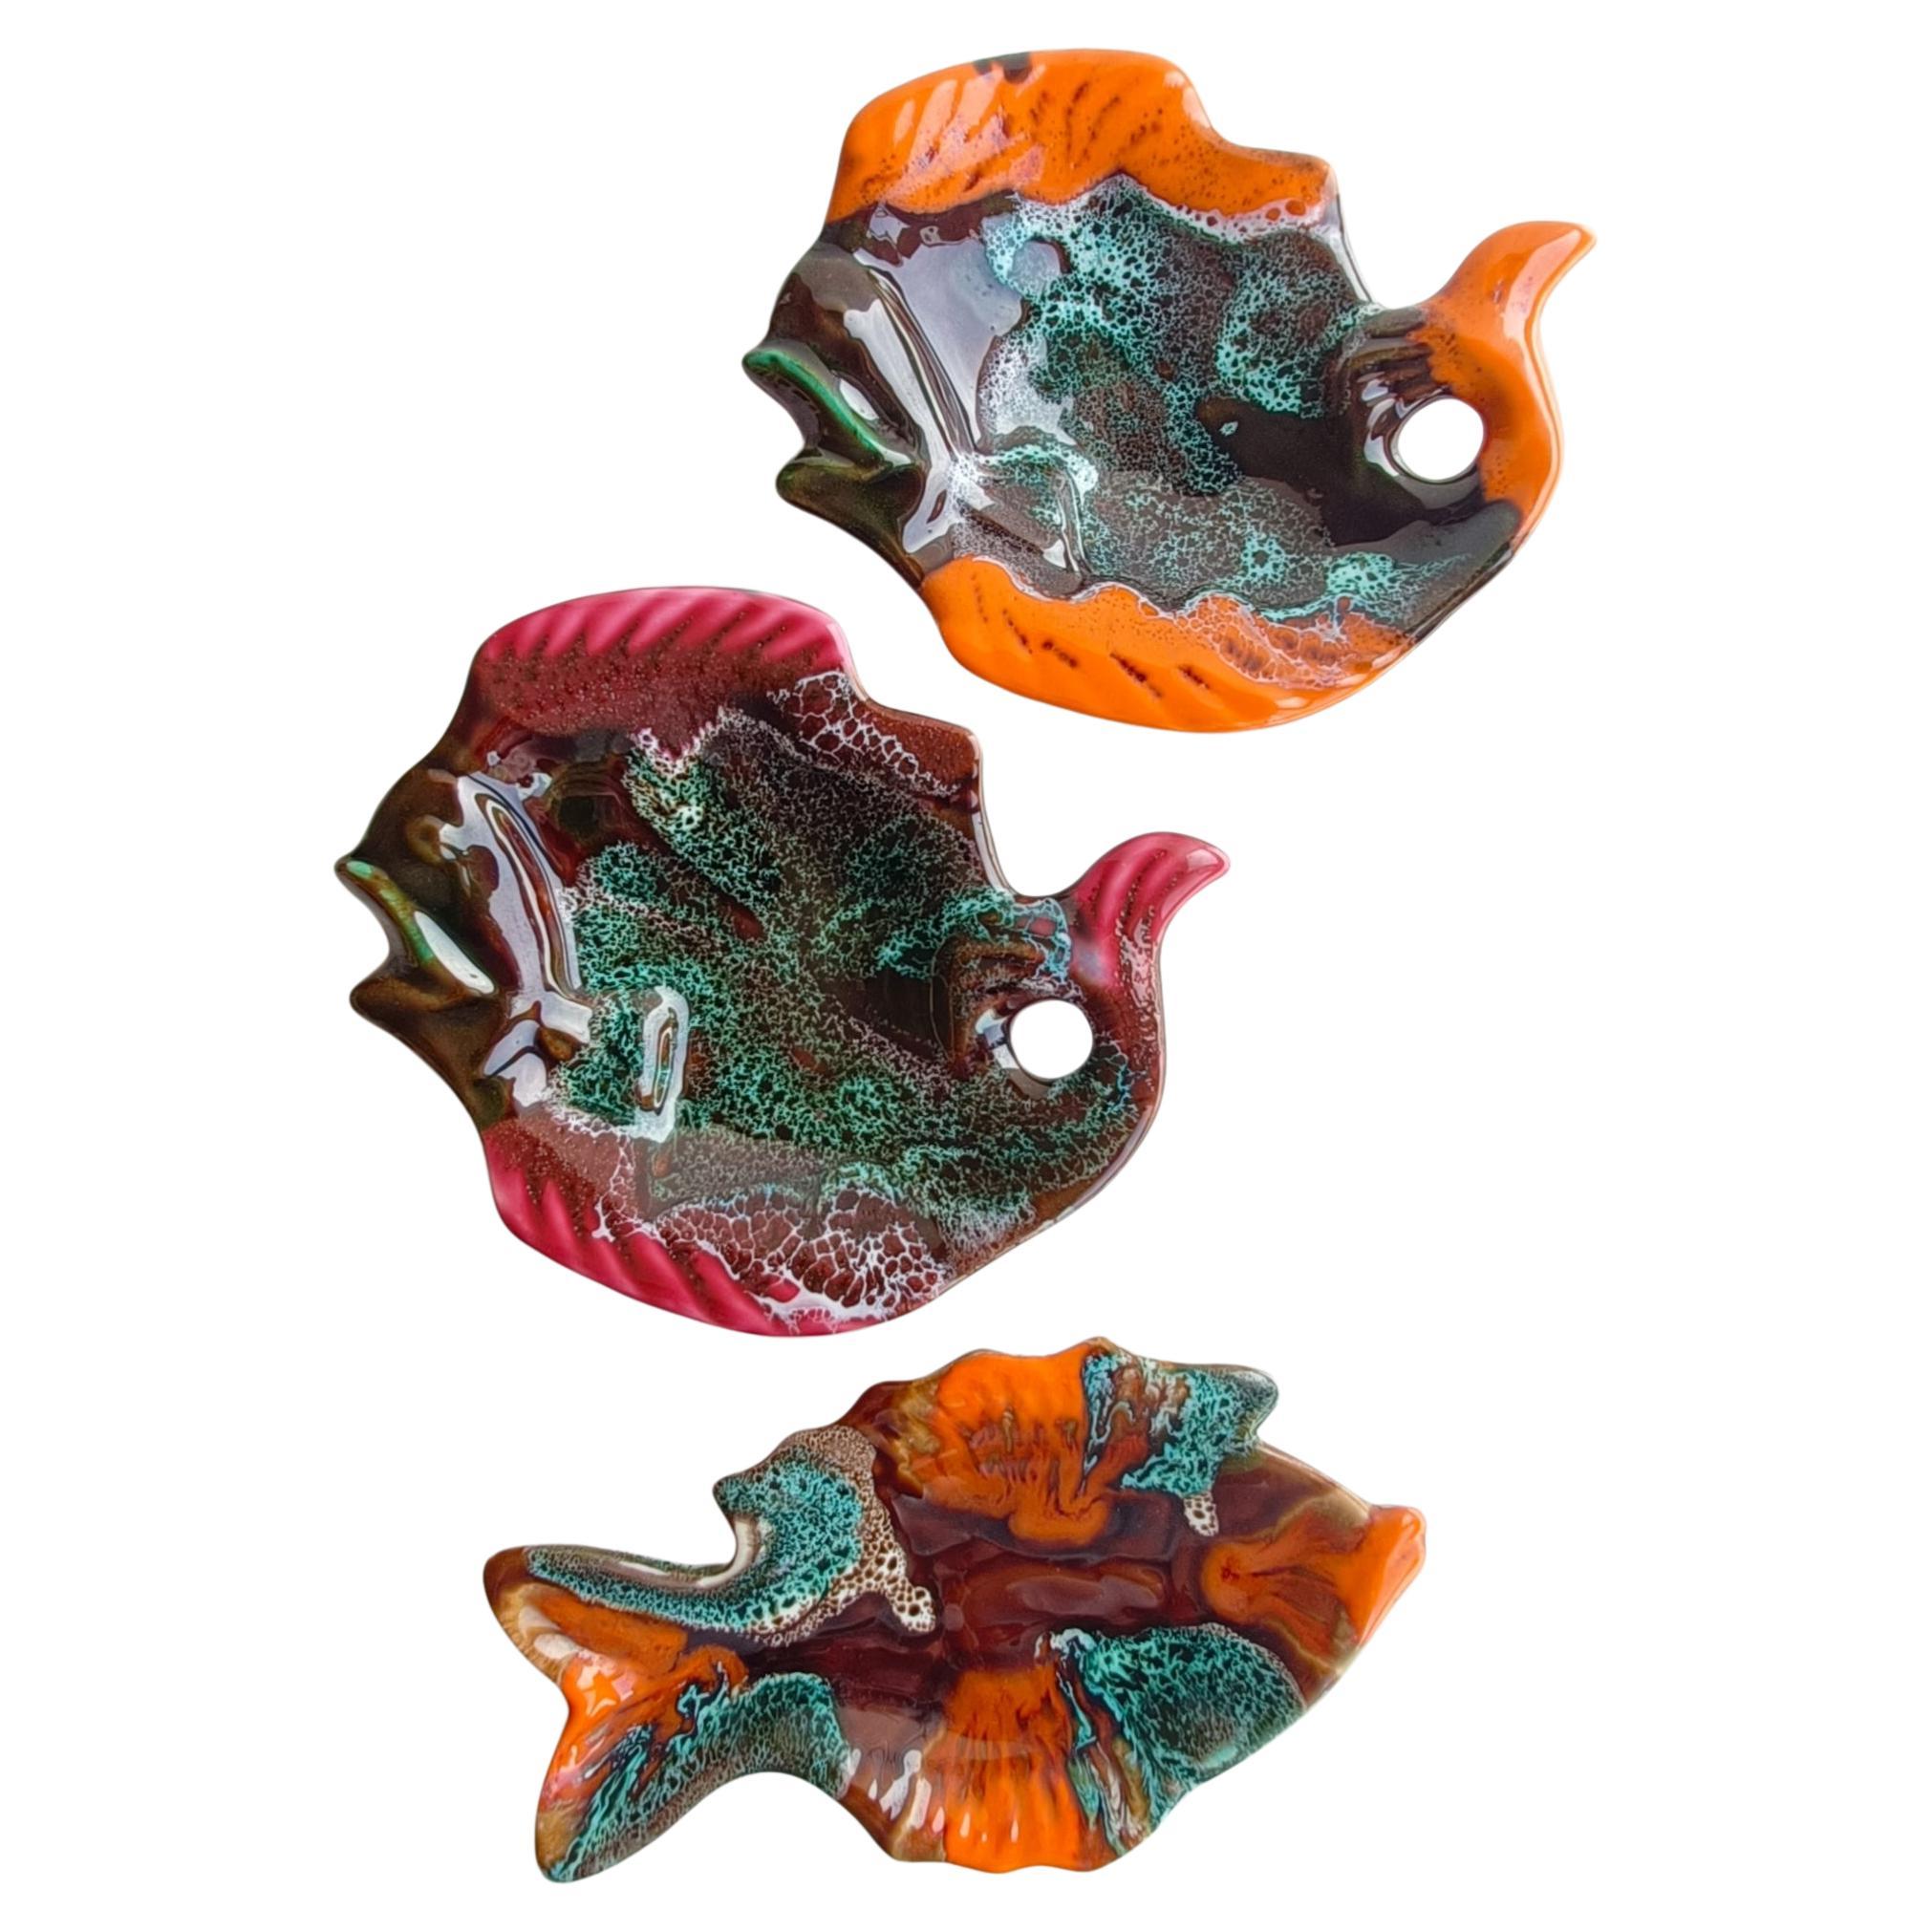 Vintage French Vallauris Signed Fat Lava Ceramic Fish Sculpture-Trays, 1950s For Sale 9